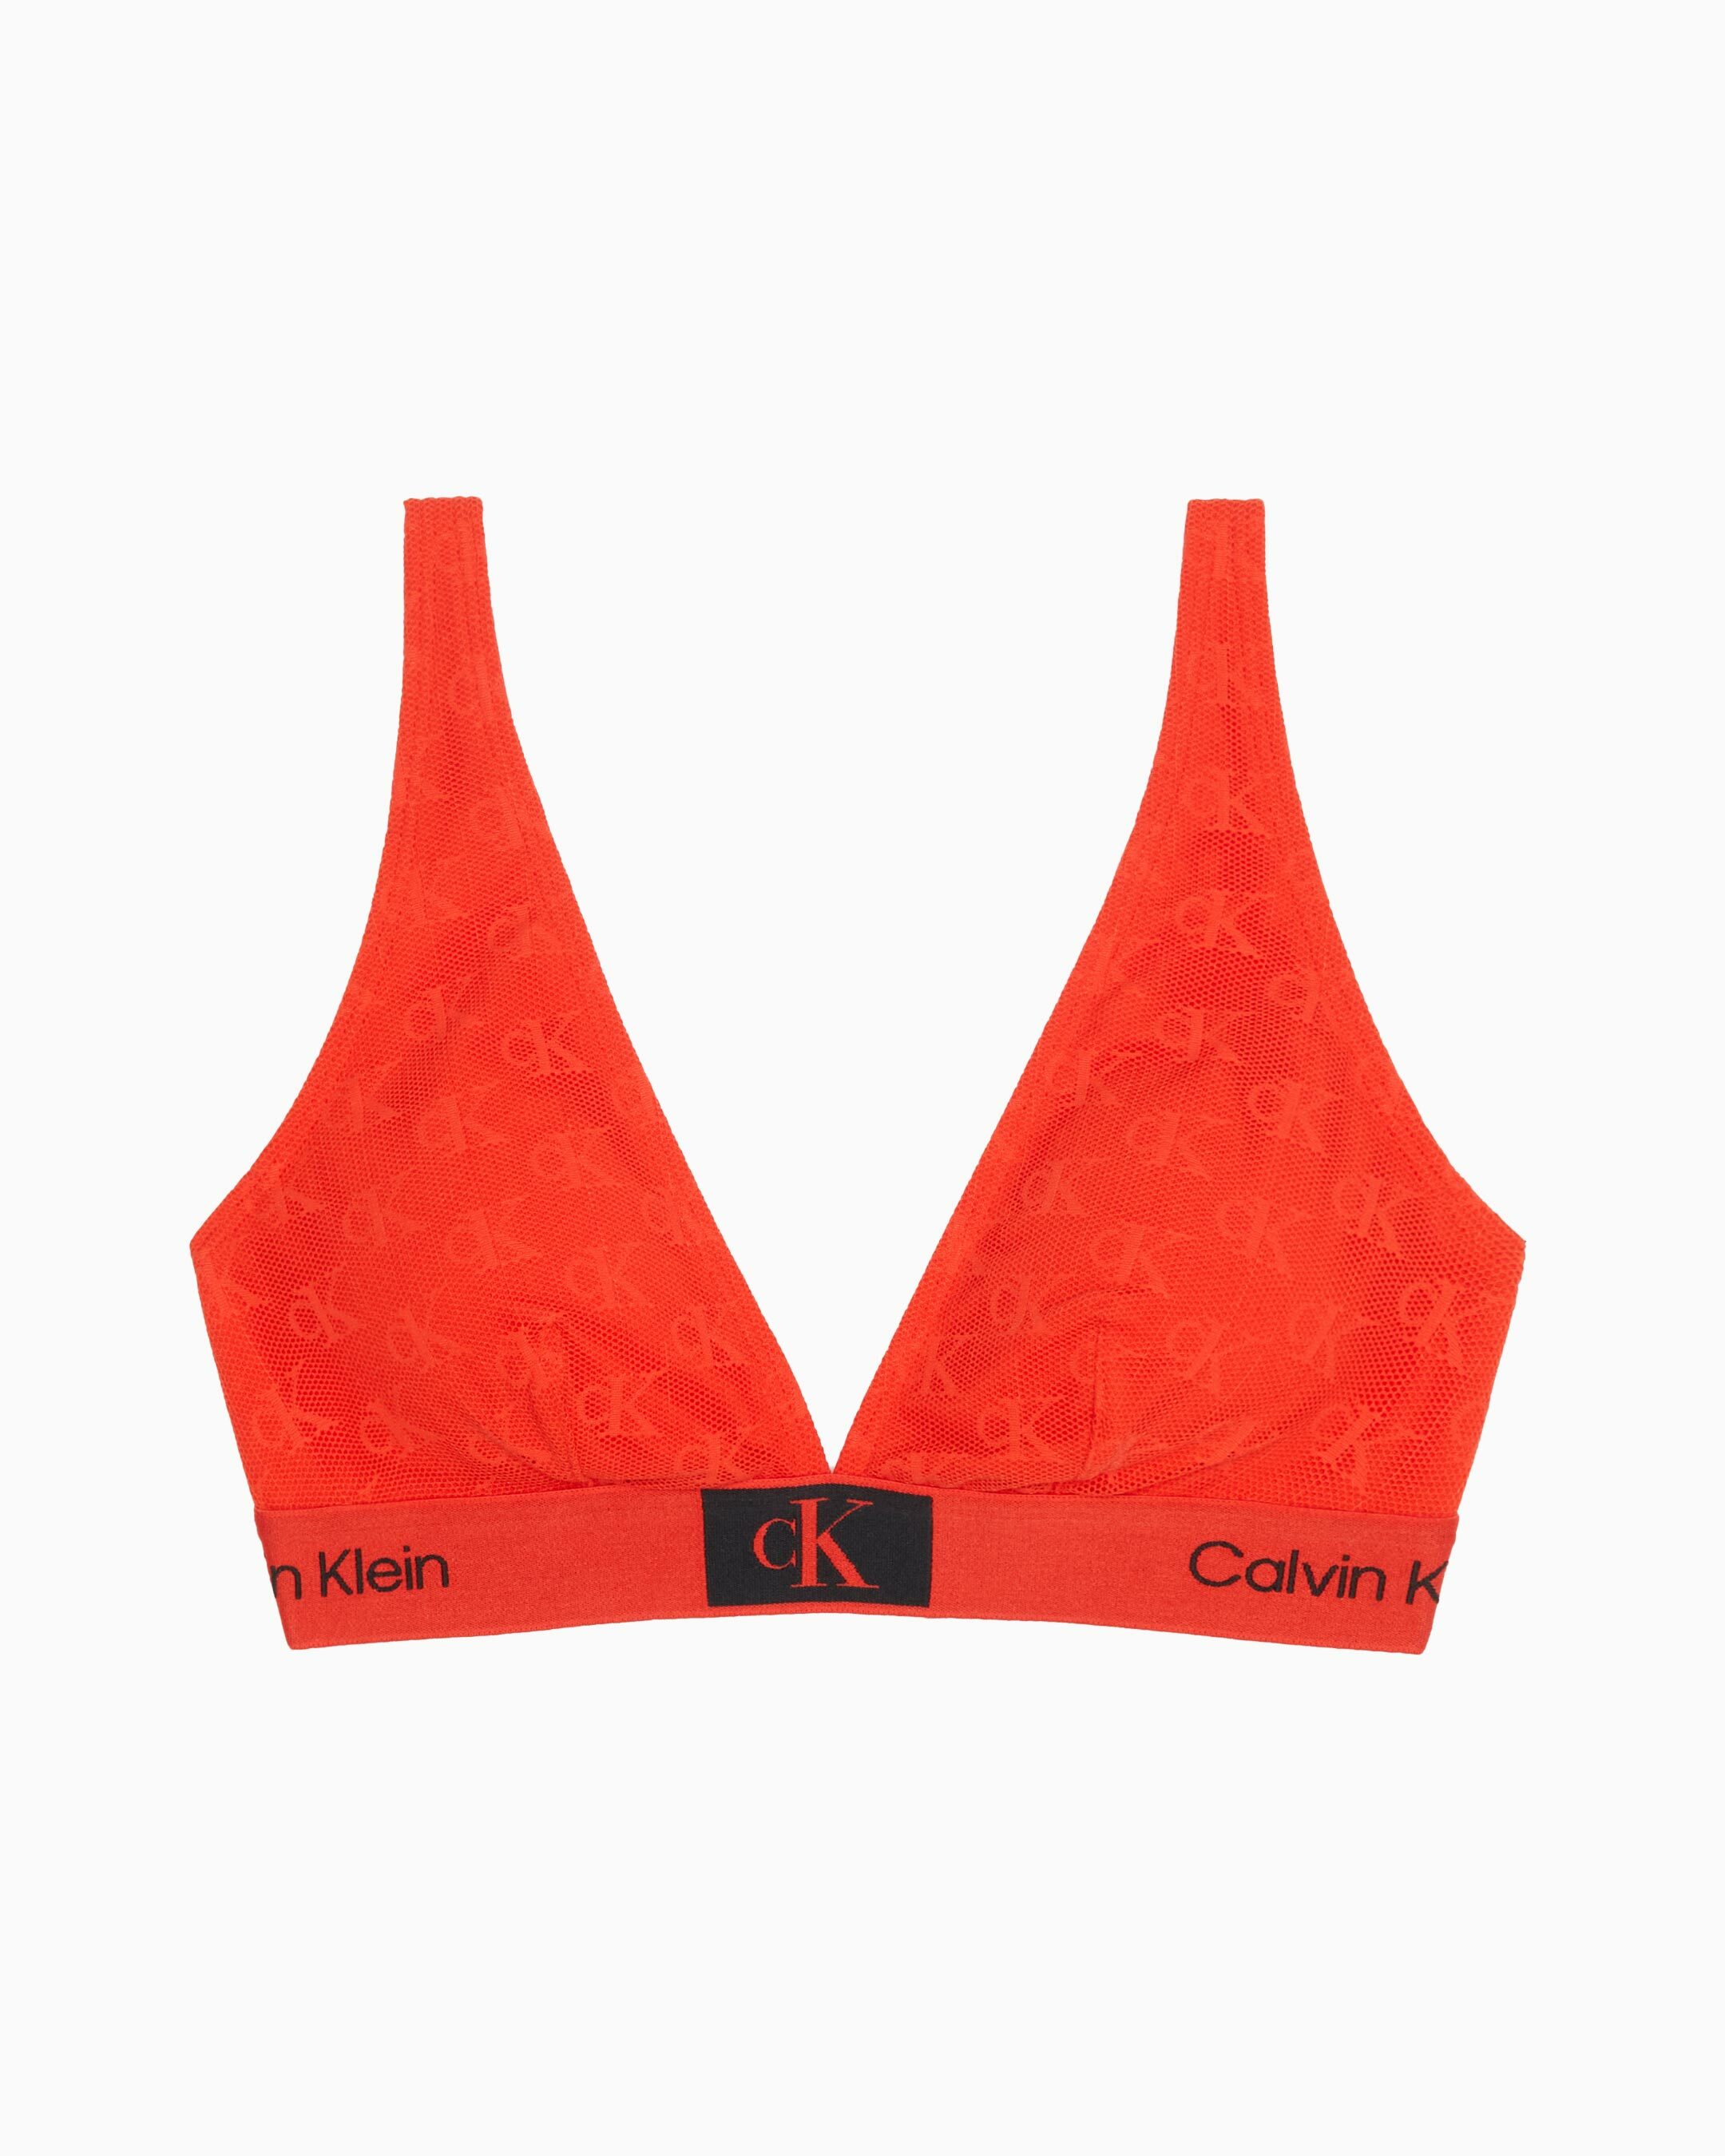 Calvin Klein 1996 Lightly Lined Triangle Bra, red